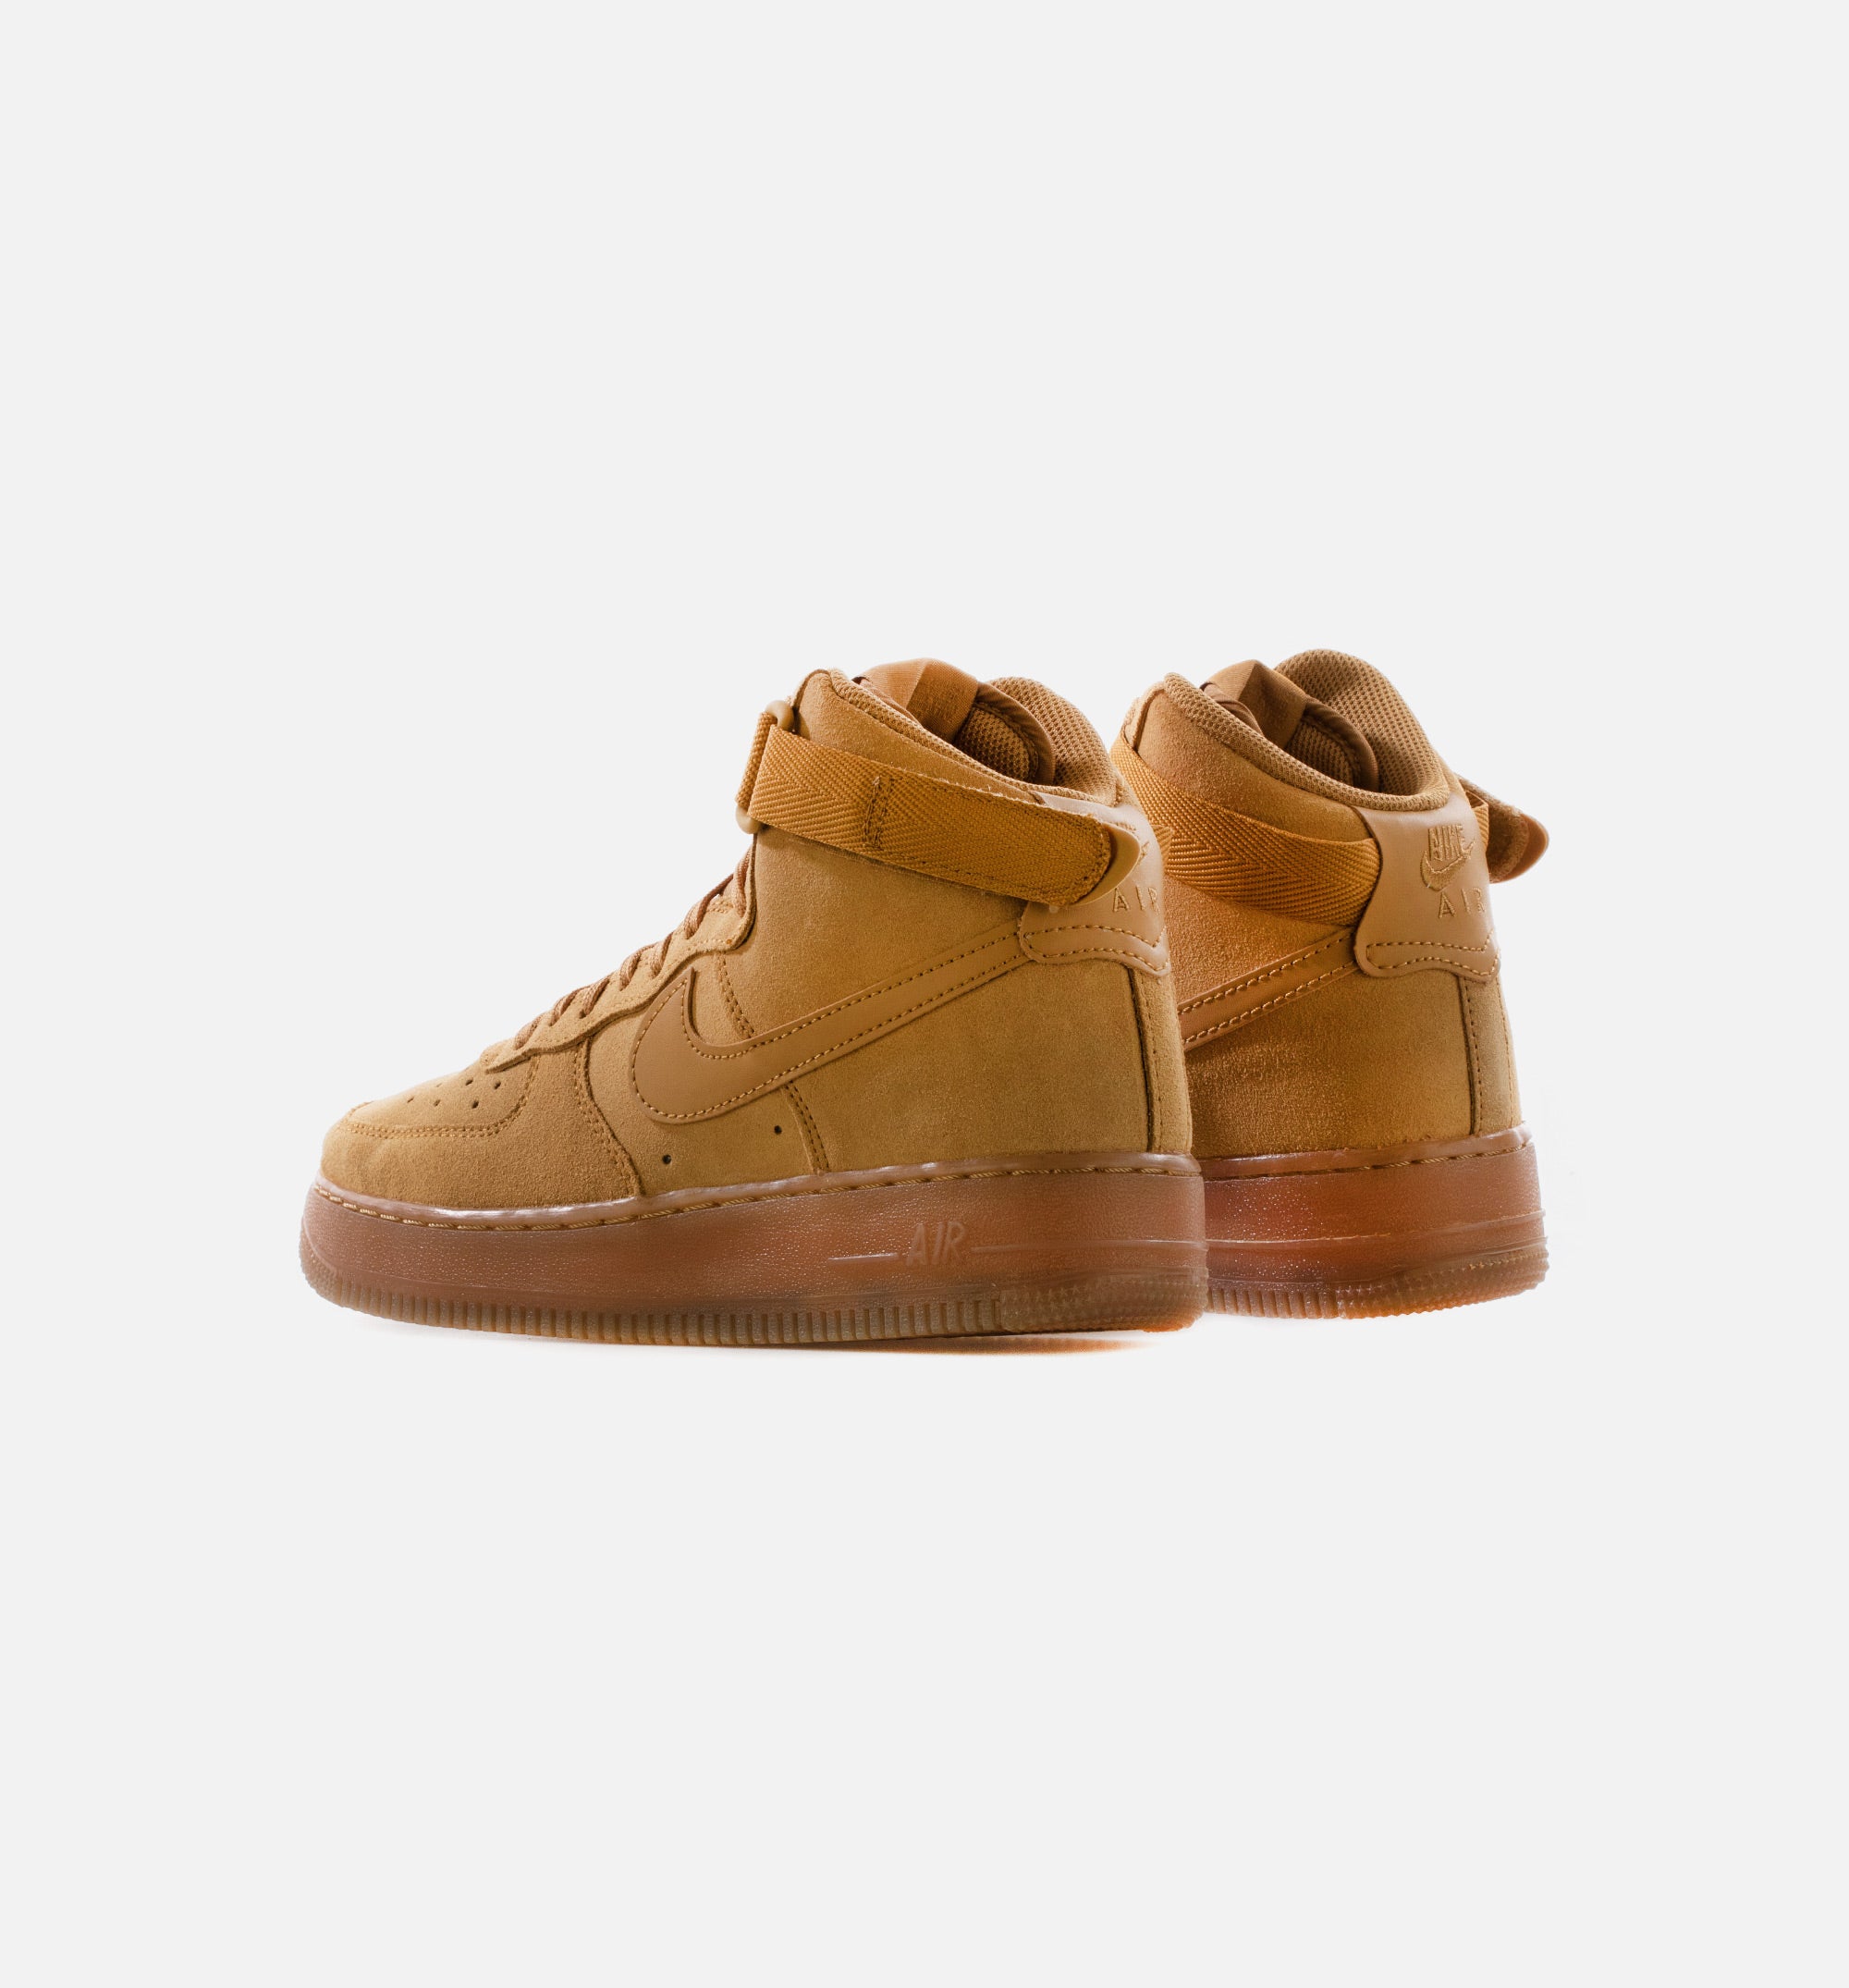 Nike Air Force 1 High LV8 Grade School Lifestyle Shoes Brown Wheat  CK0262-700 – Shoe Palace